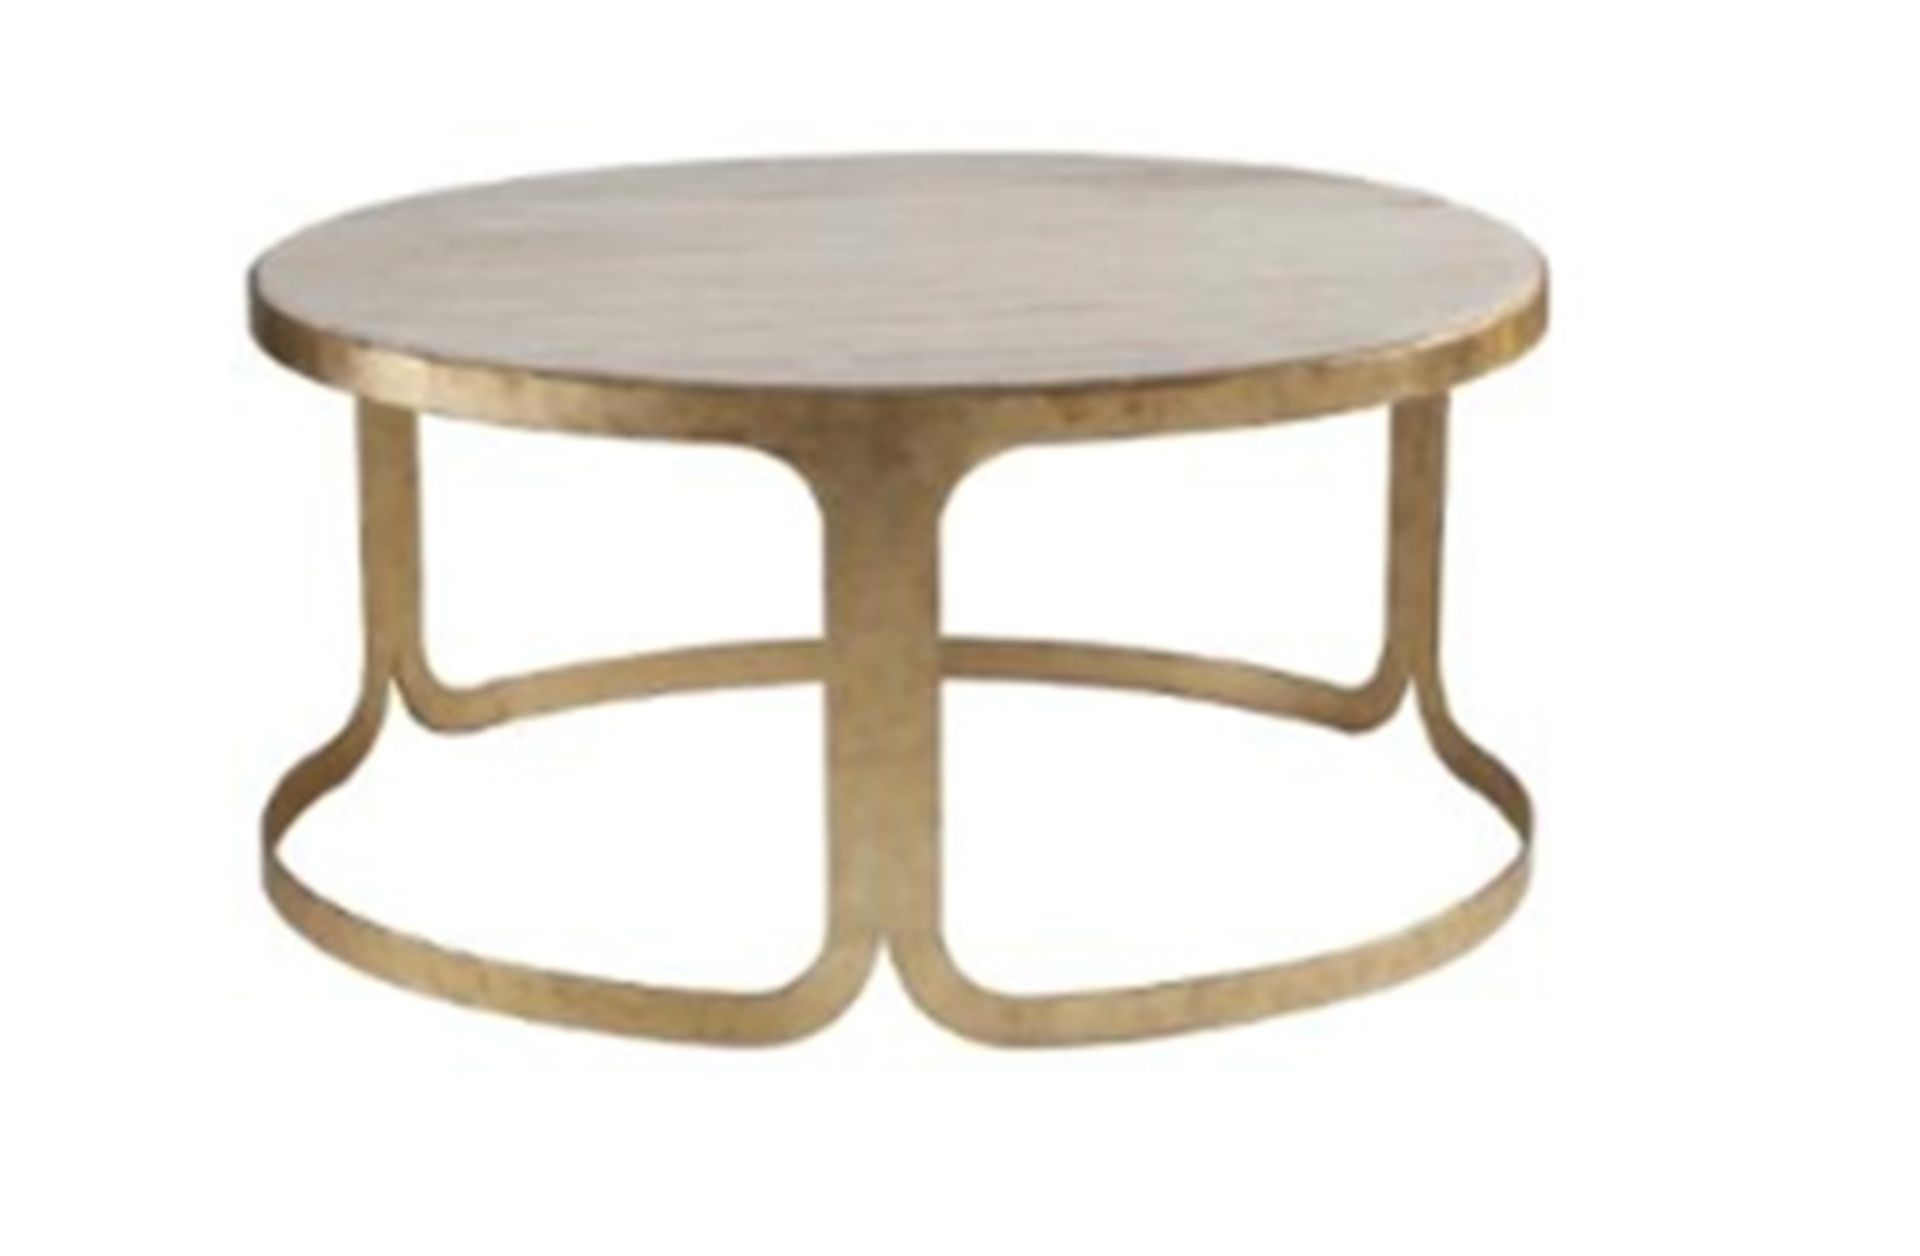 Luxor Travertine Coffee Table- With Its Solid Travertine Top And Gilt Leafed Metal Frame This